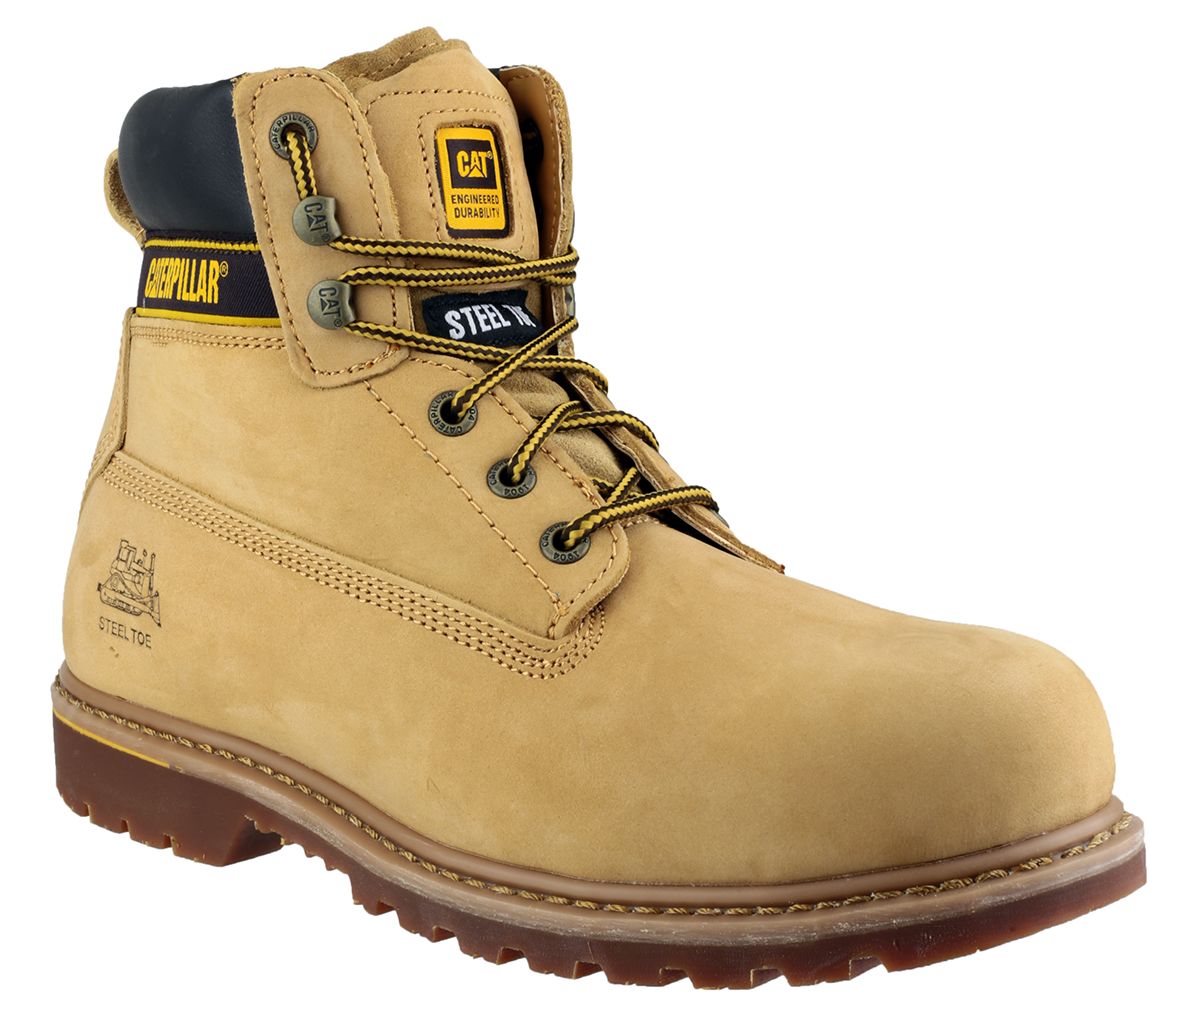 CAT Holton Honey Steel Toe Capped Mens Safety Boots, UK 12, EU 47